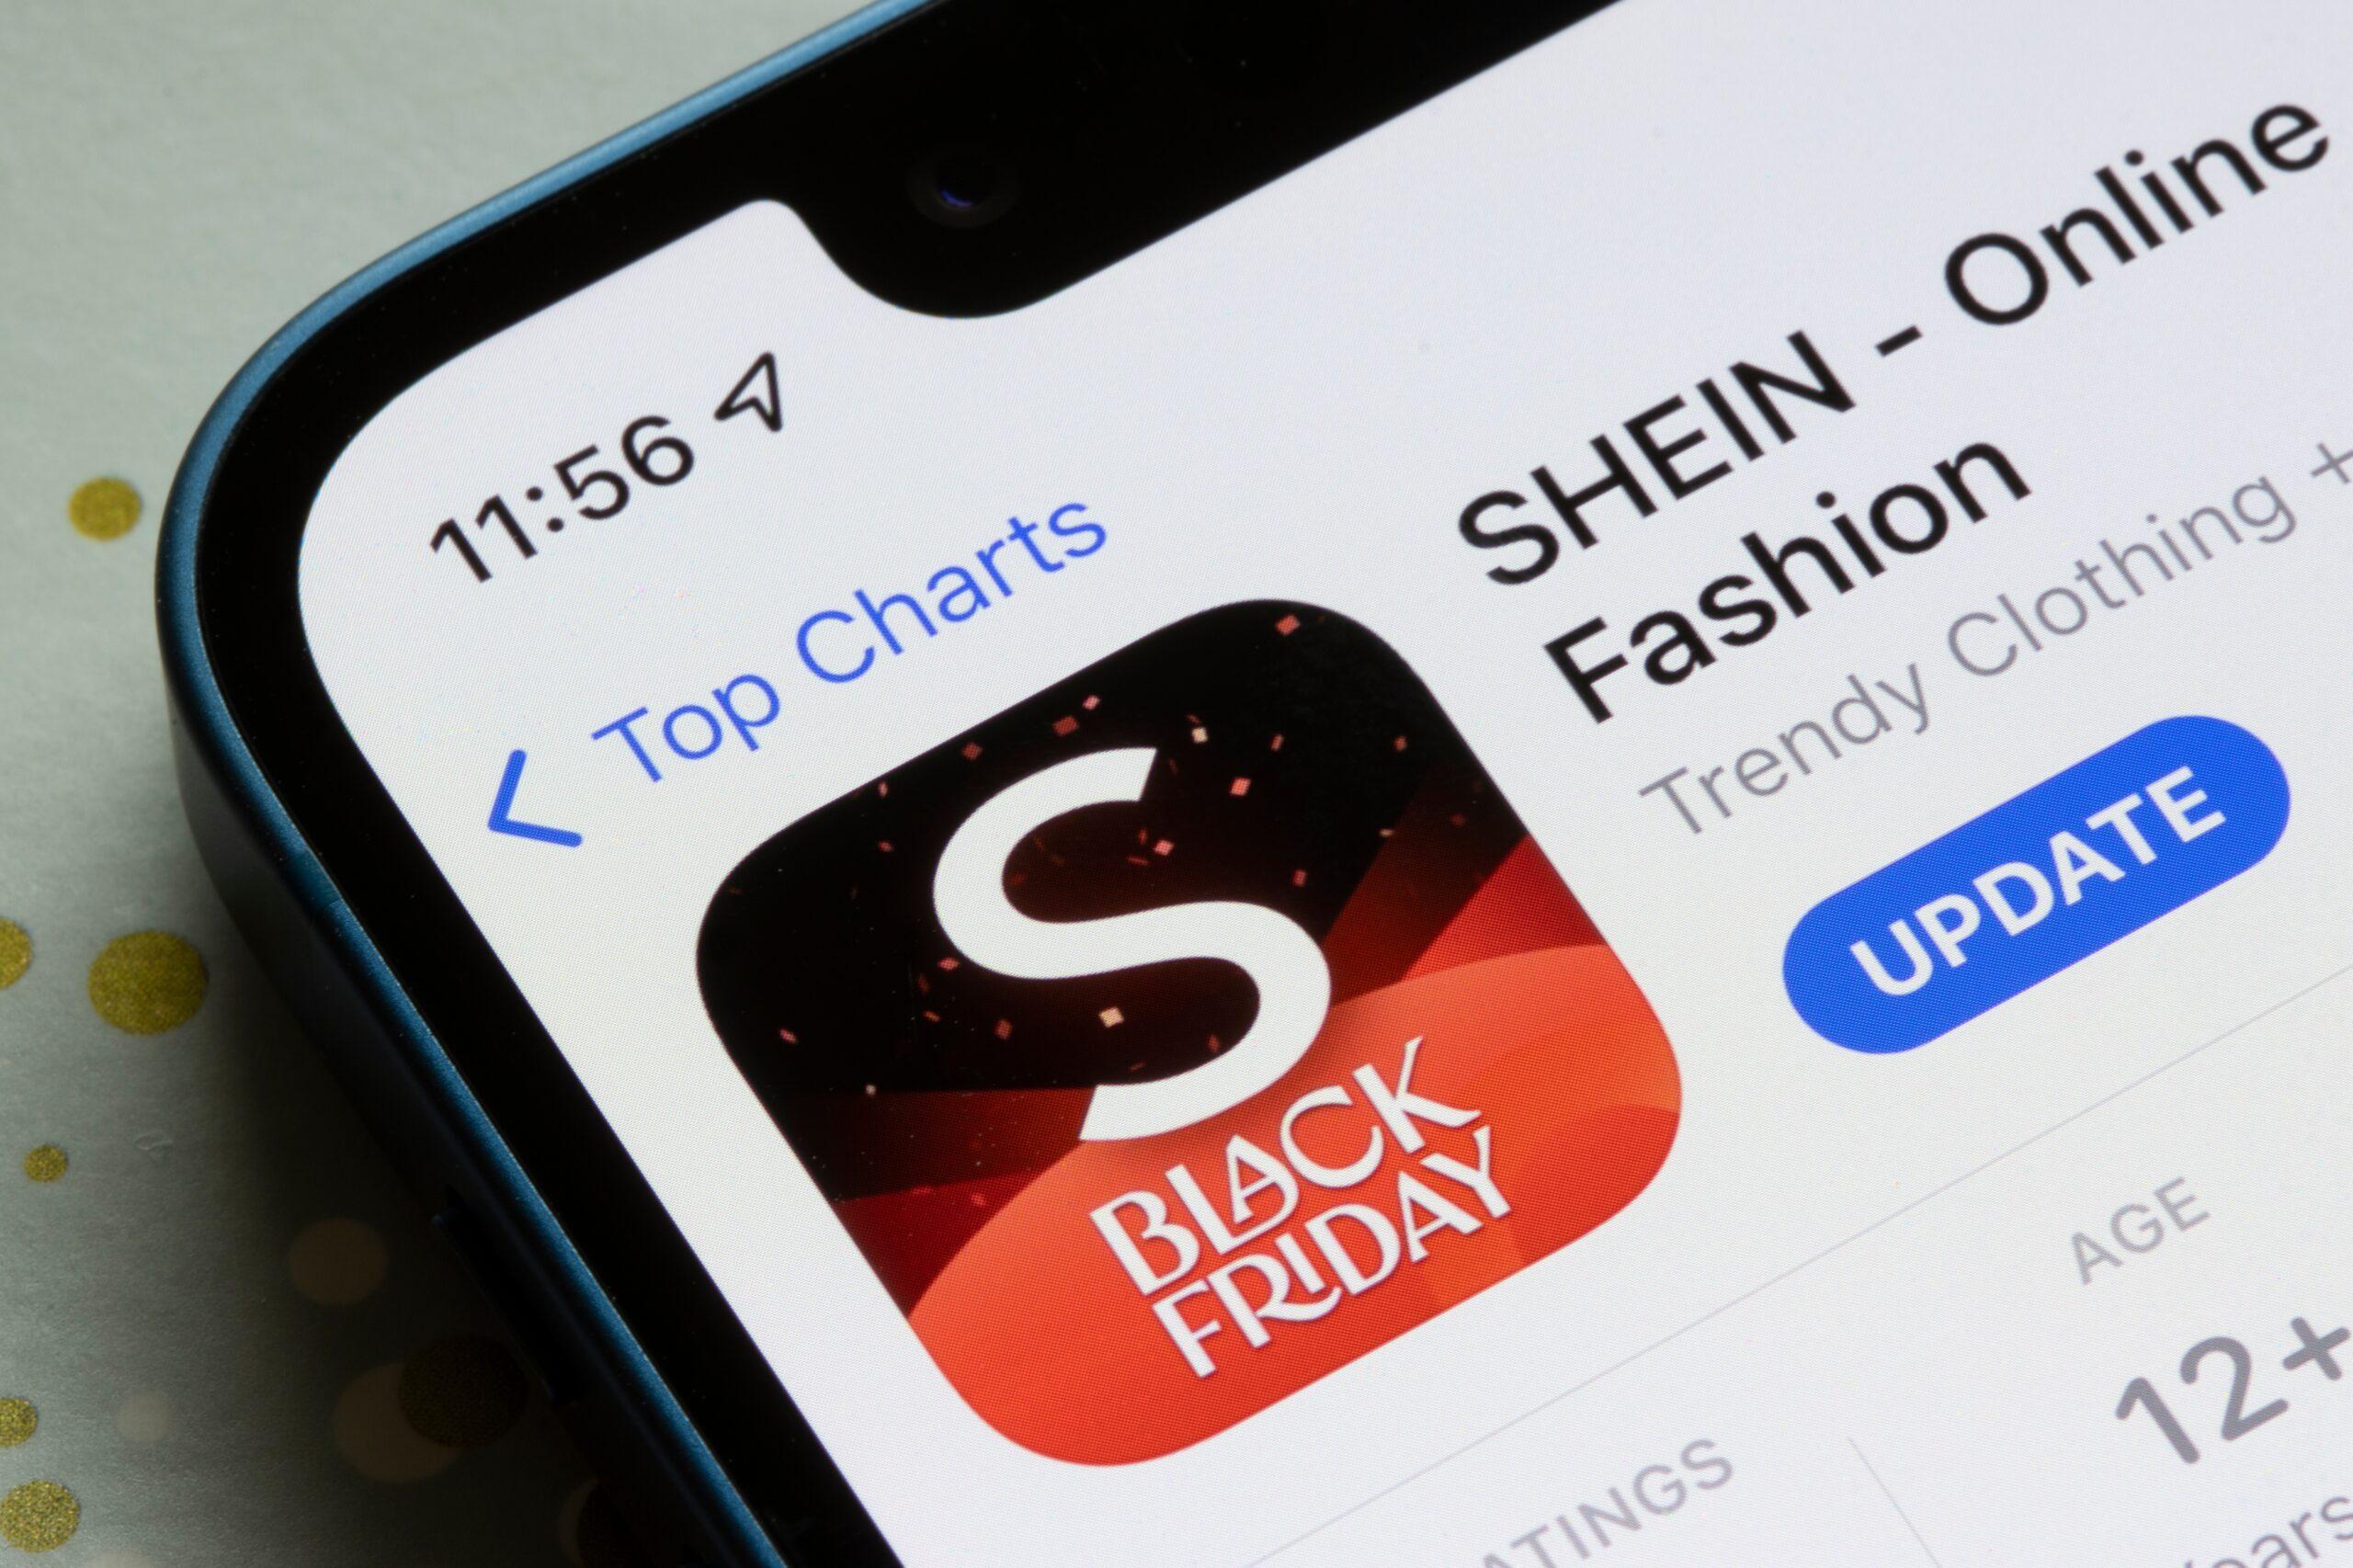 Shein IPO filing renews questions about labor practices